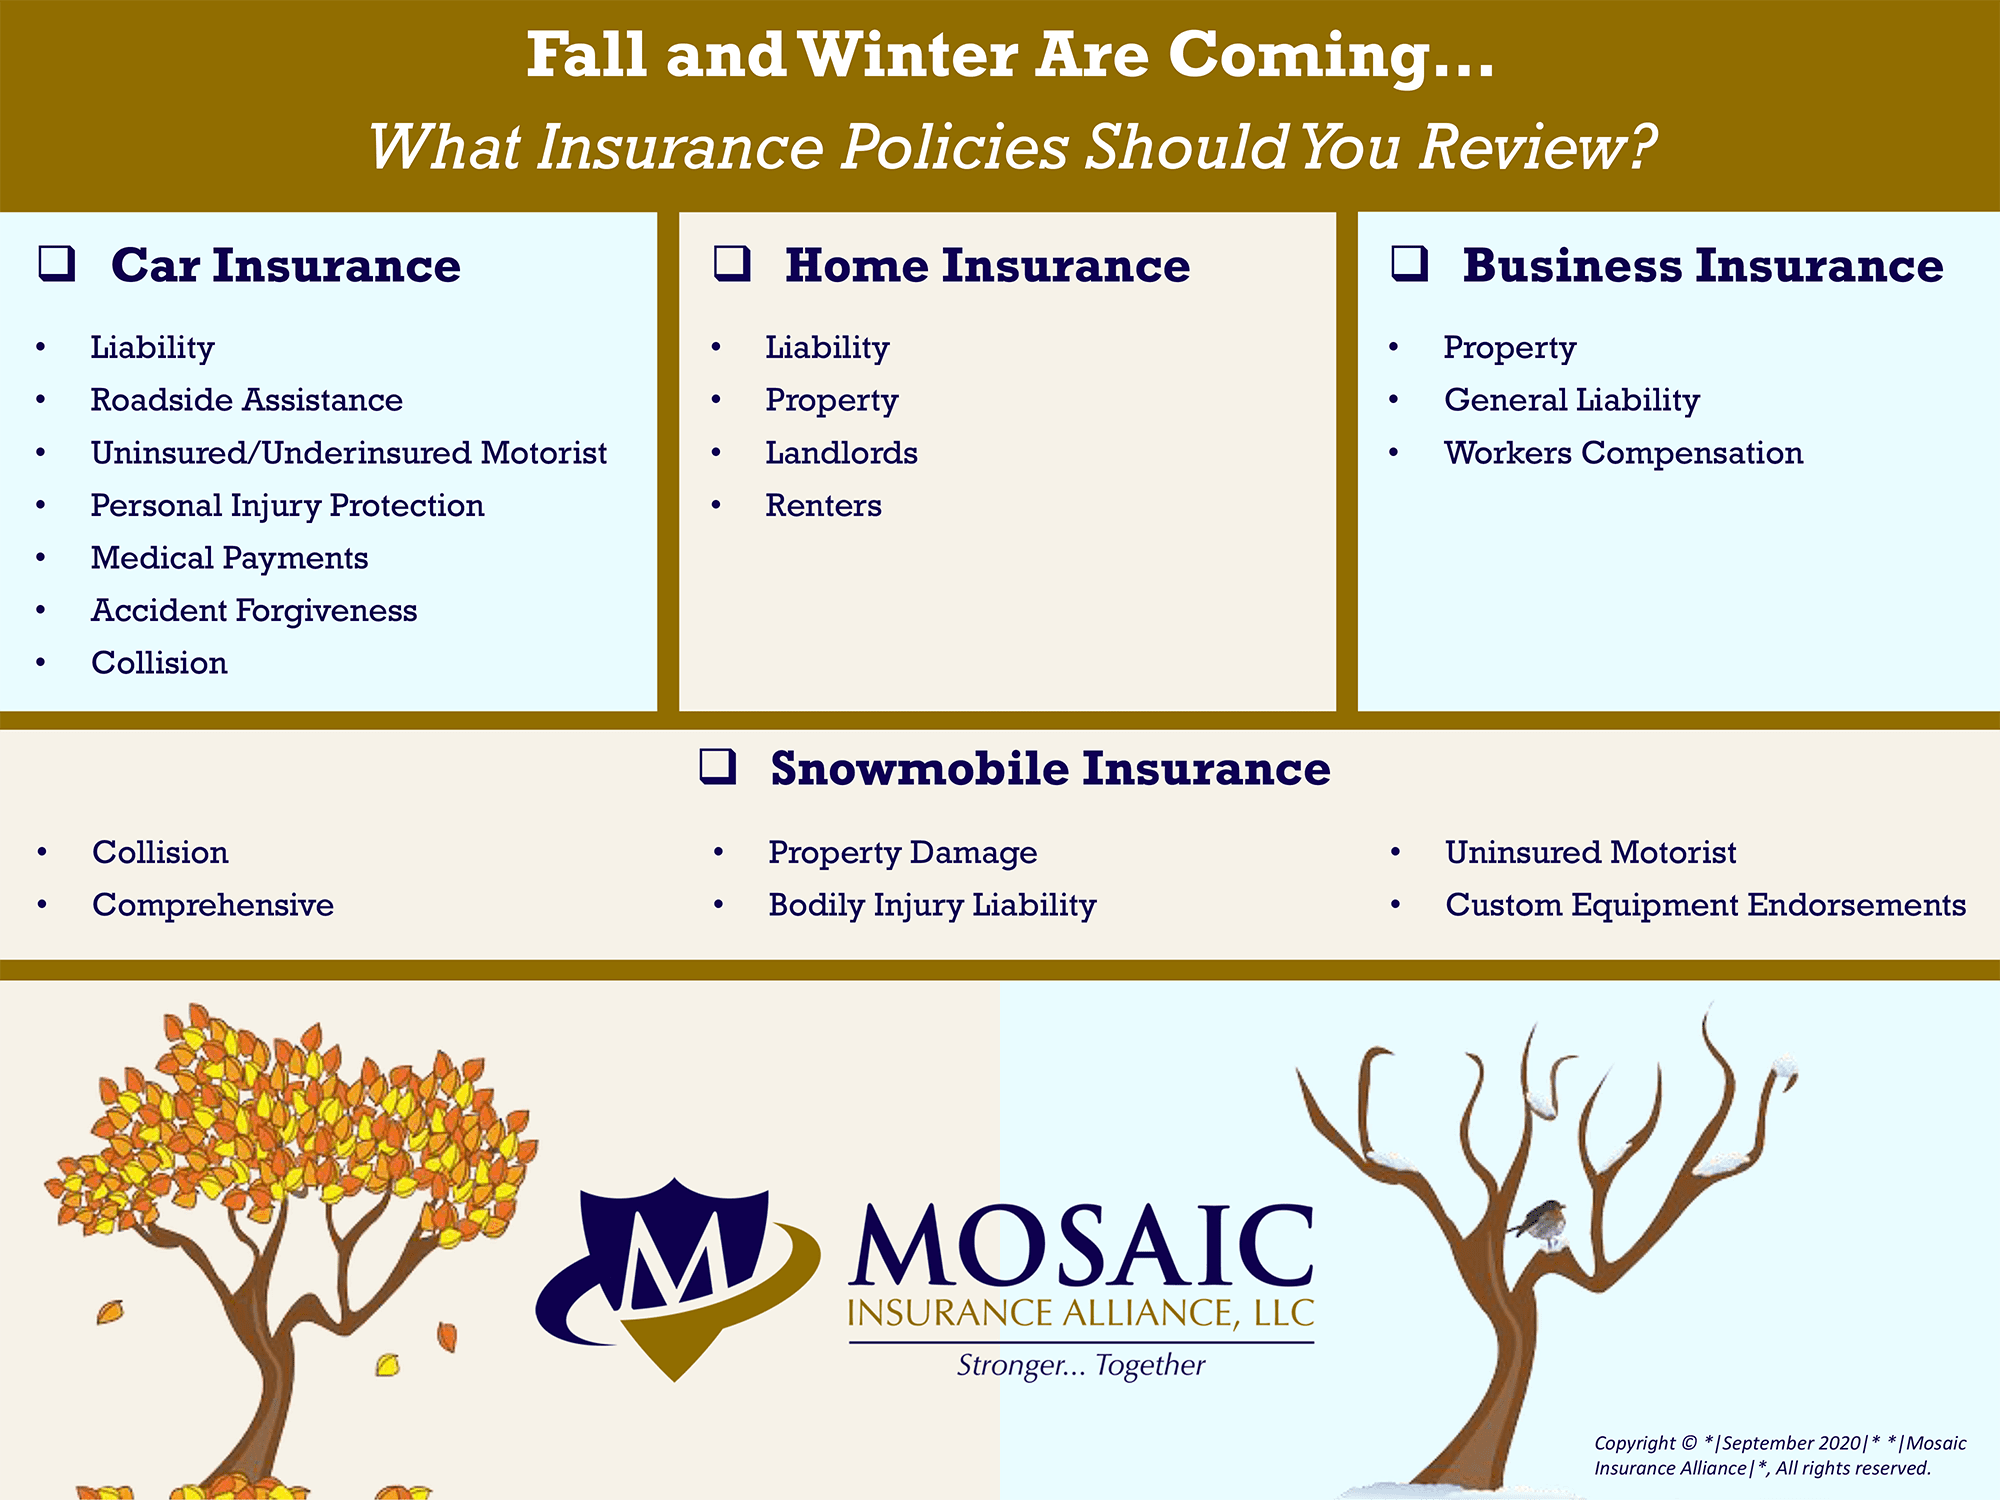 Mosaic Insurance in Lynnwood has a checklist for what insurance you should review for fall and winter seasons